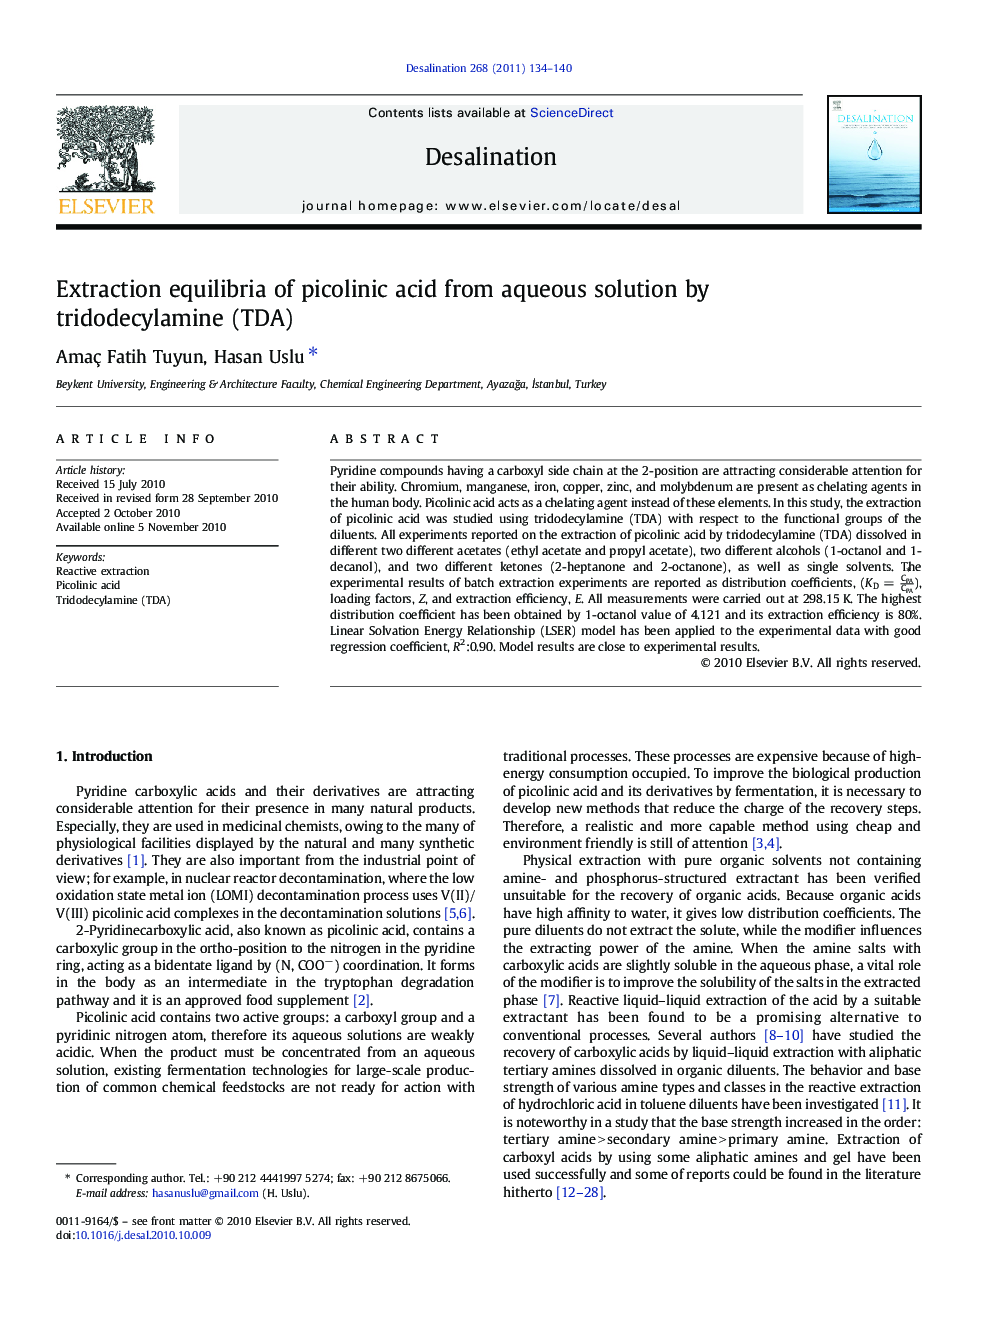 Extraction equilibria of picolinic acid from aqueous solution by tridodecylamine (TDA)